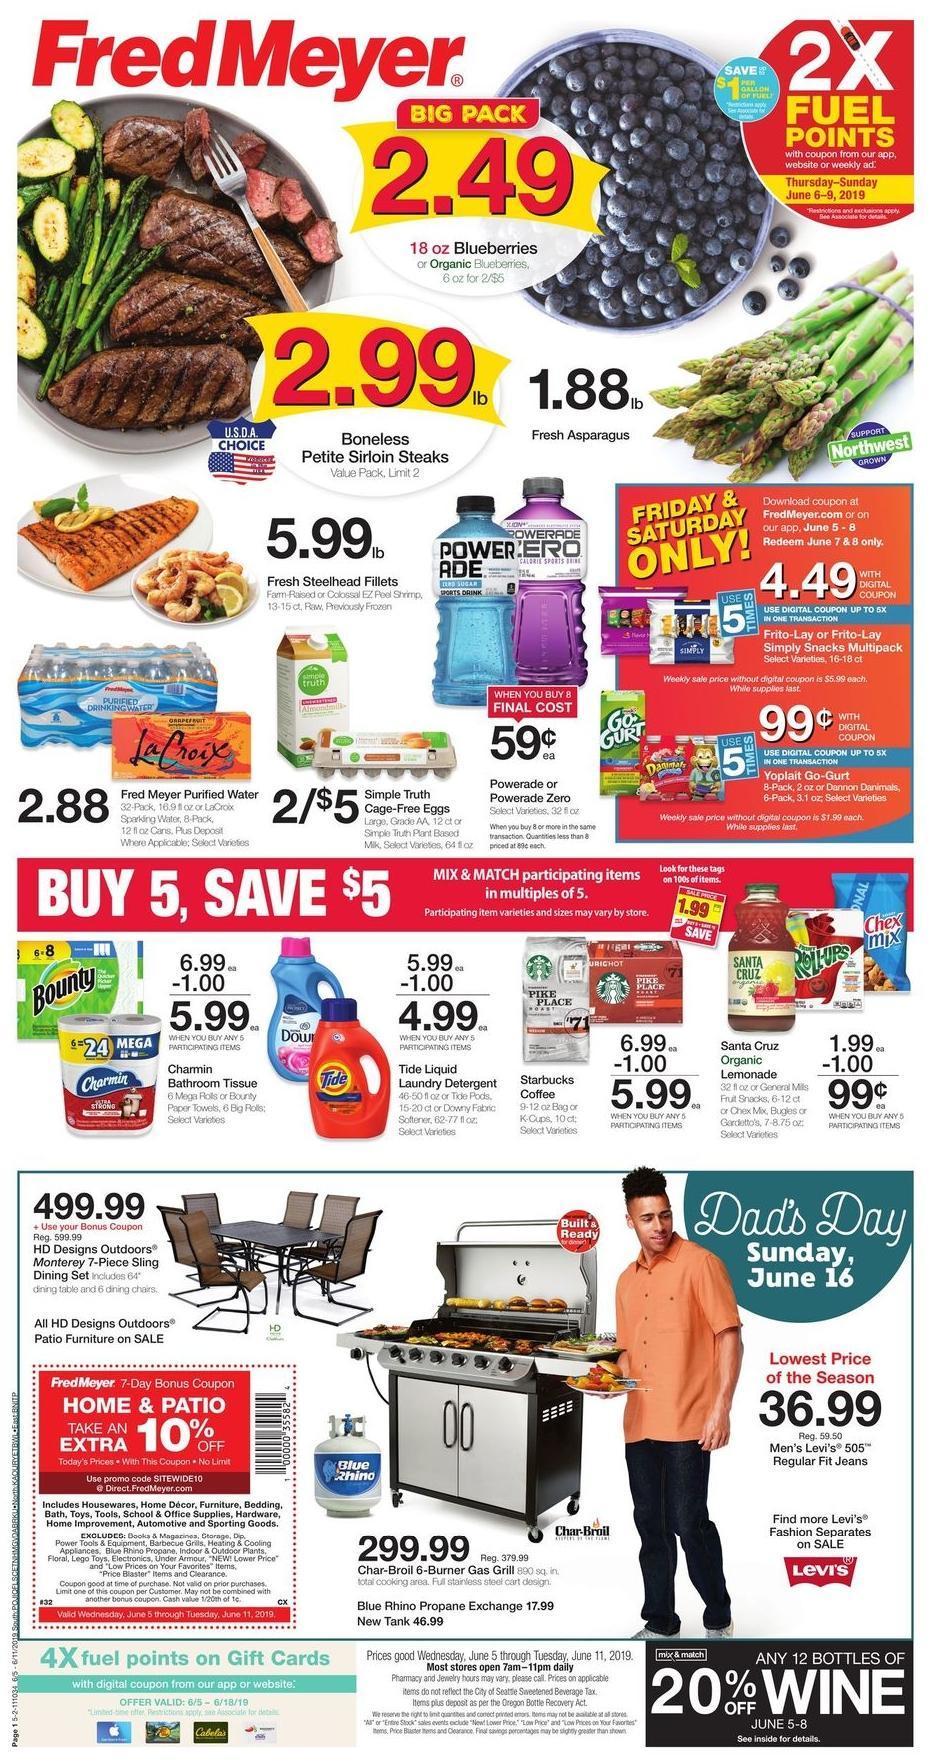 Fred Meyer Weekly Ad & Specials from June 5